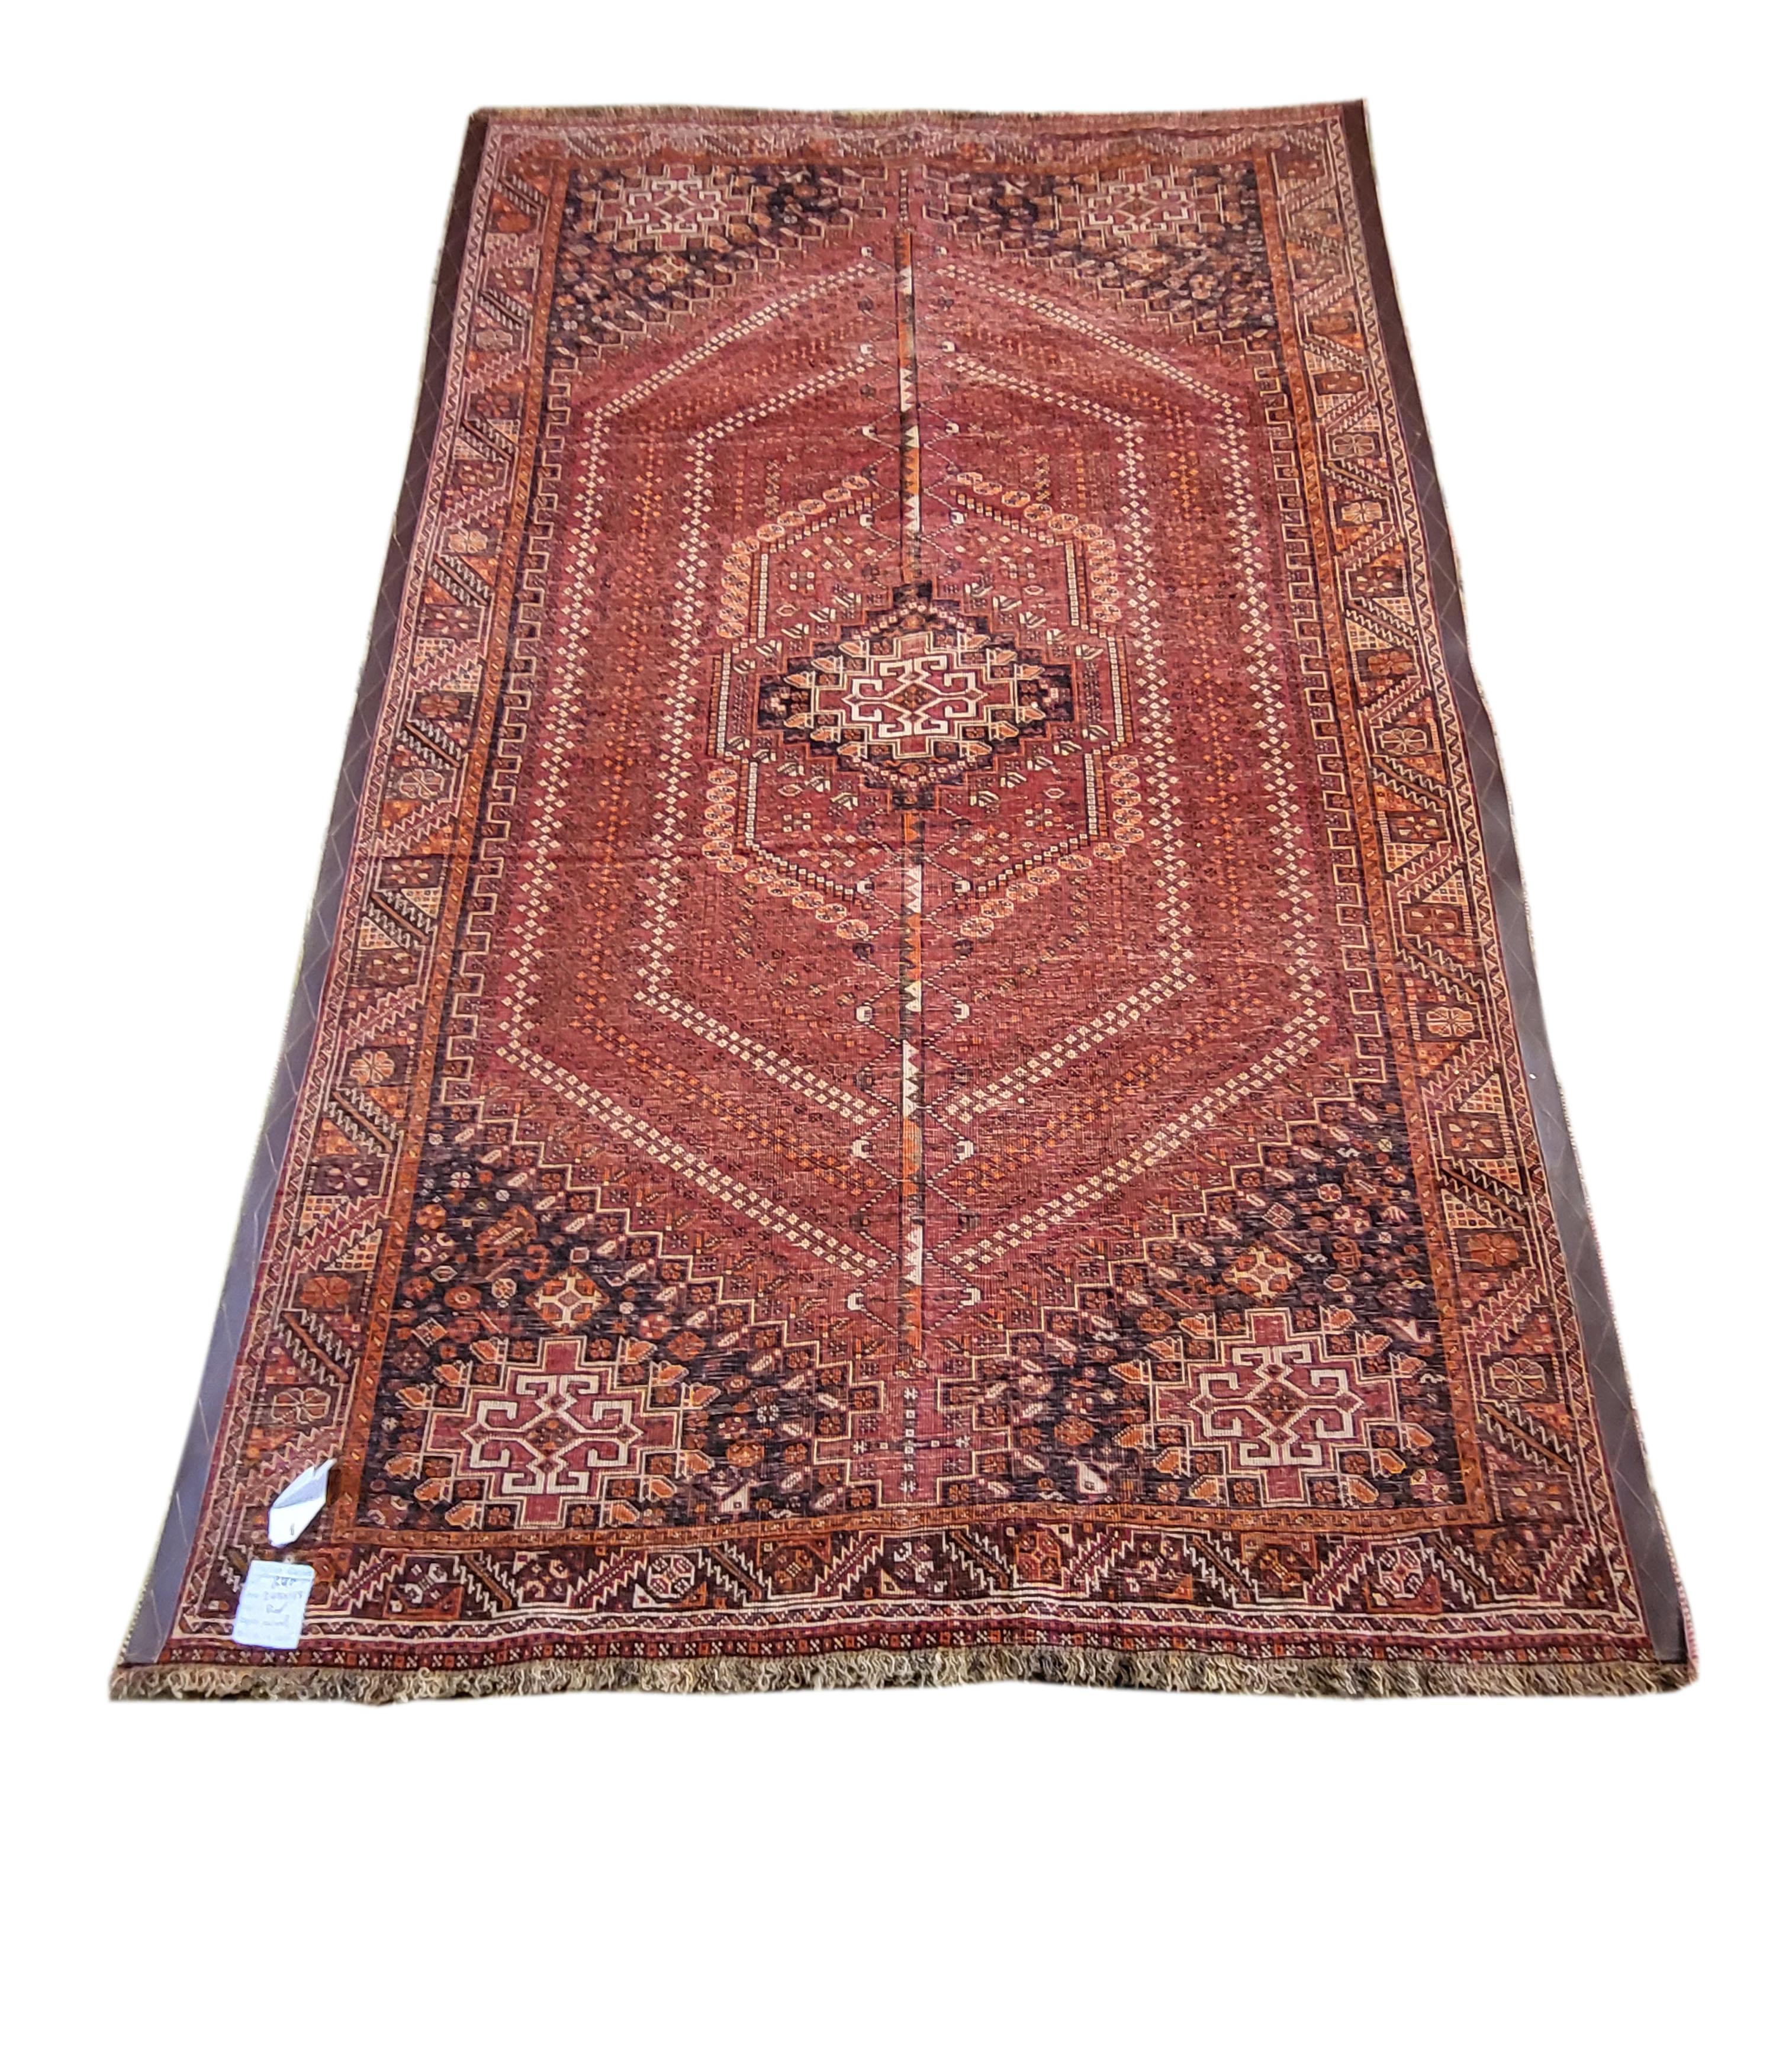 Immaculate vintage Qashqai- Rahimi. This stunning rug is one of a kind and in perfect condition. The incredibly intricate design is enhanced with the rich color selection, and the shine of the incredibly fine wool. The Rahimis are a sub tribe of